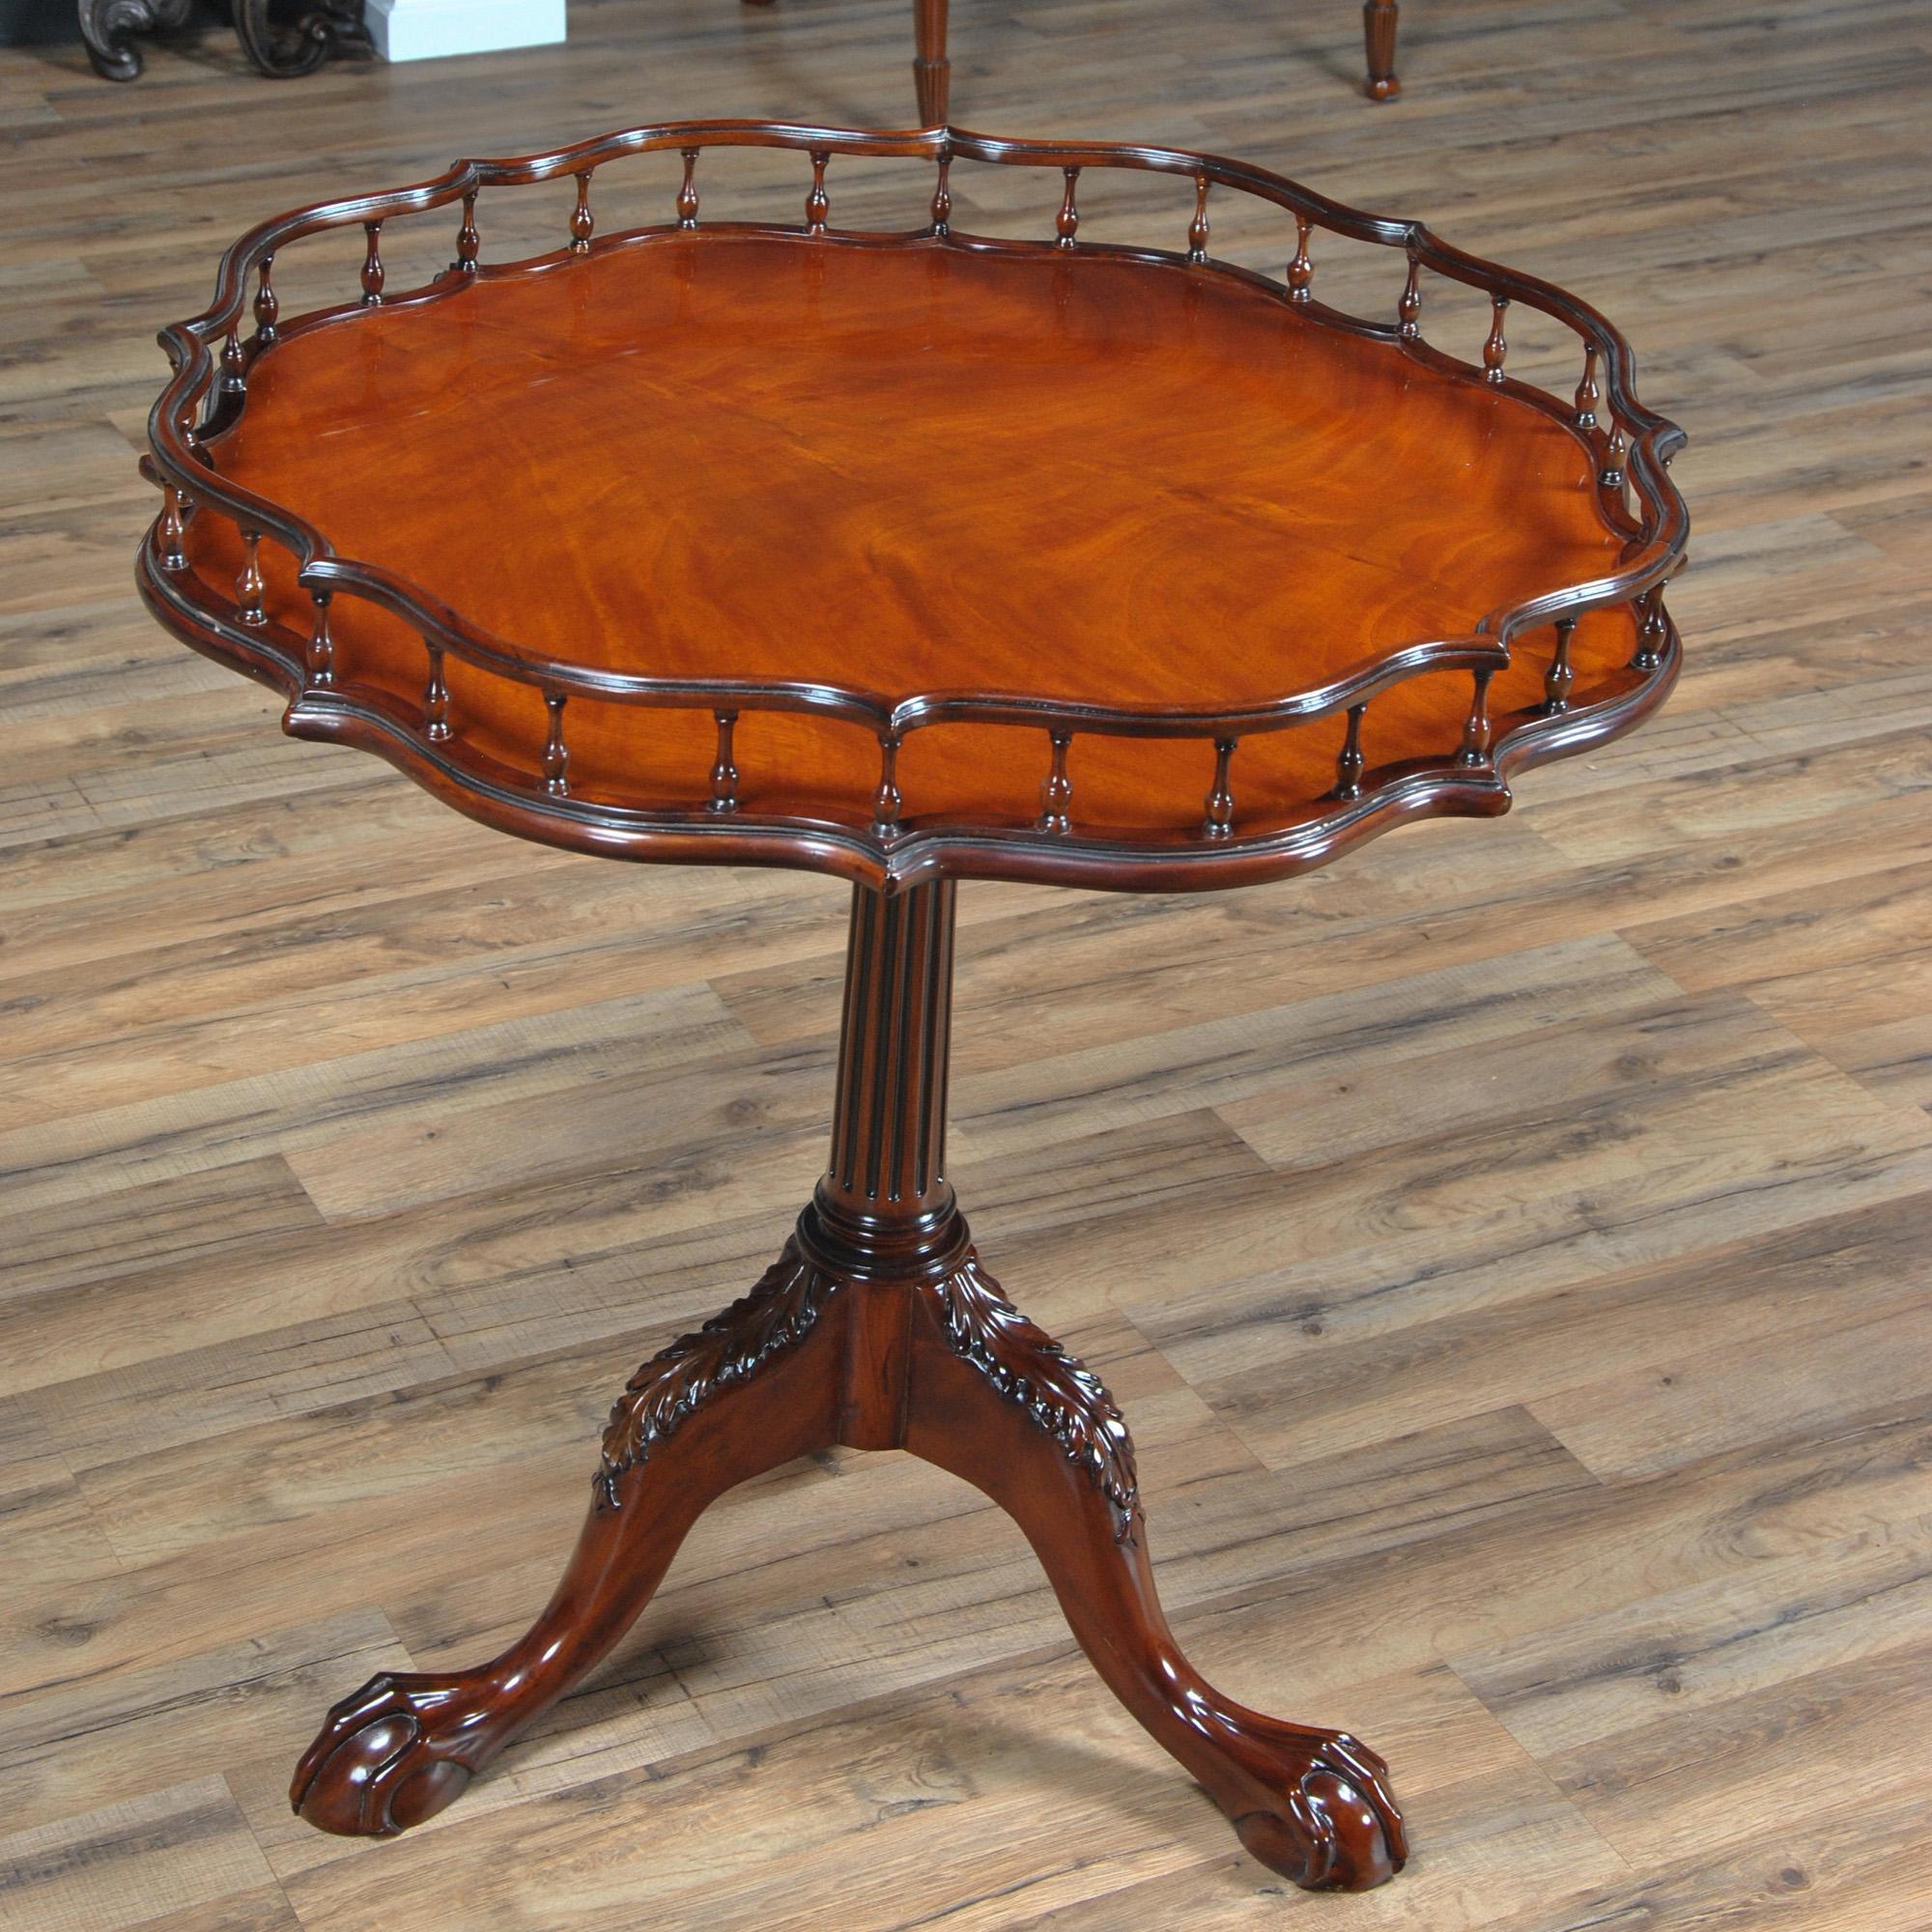 A fantastic round table which we refer to as the Chippendale Gallery Table. Hand turned, solid mahogany pillars support the gallery around the top of the item while a solid mahogany, hand carved and reeded column supports the top itself. All of the